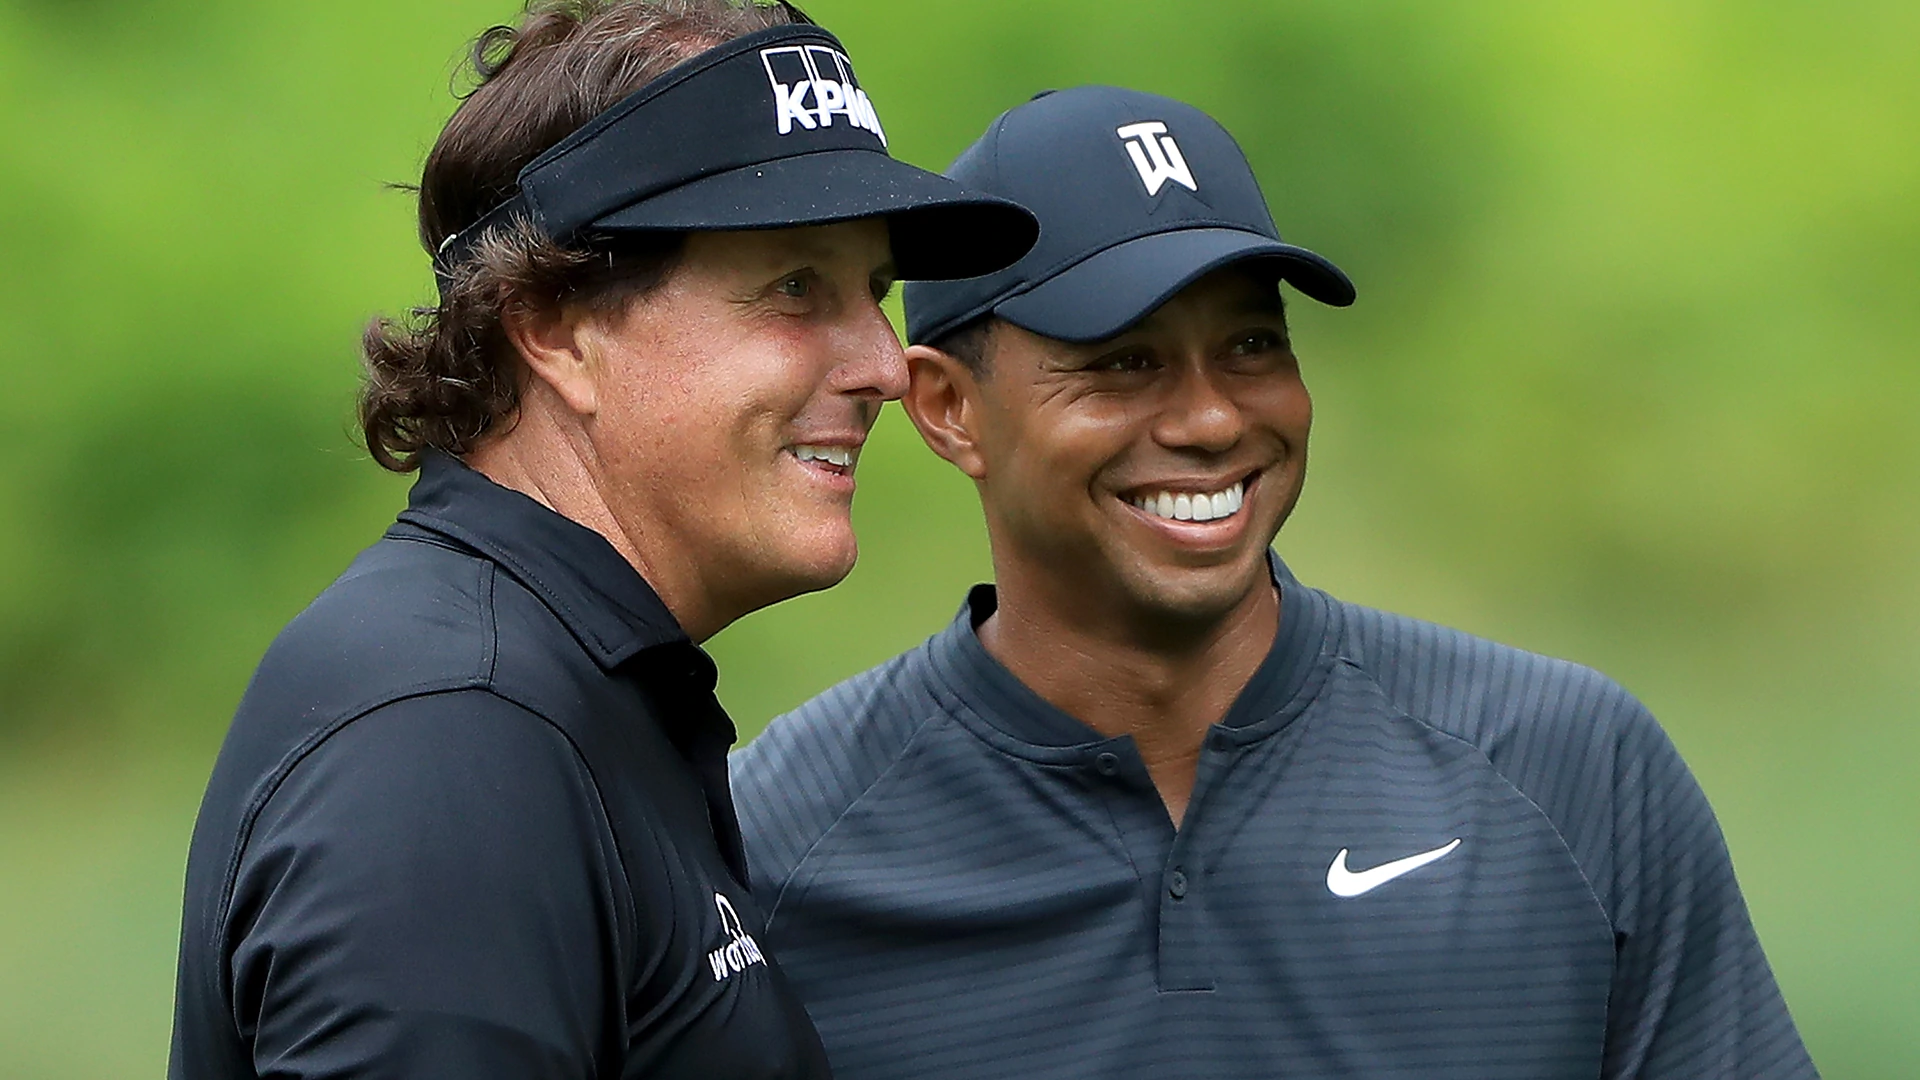 Phil casually refers to $50,000 side bets during Tiger match